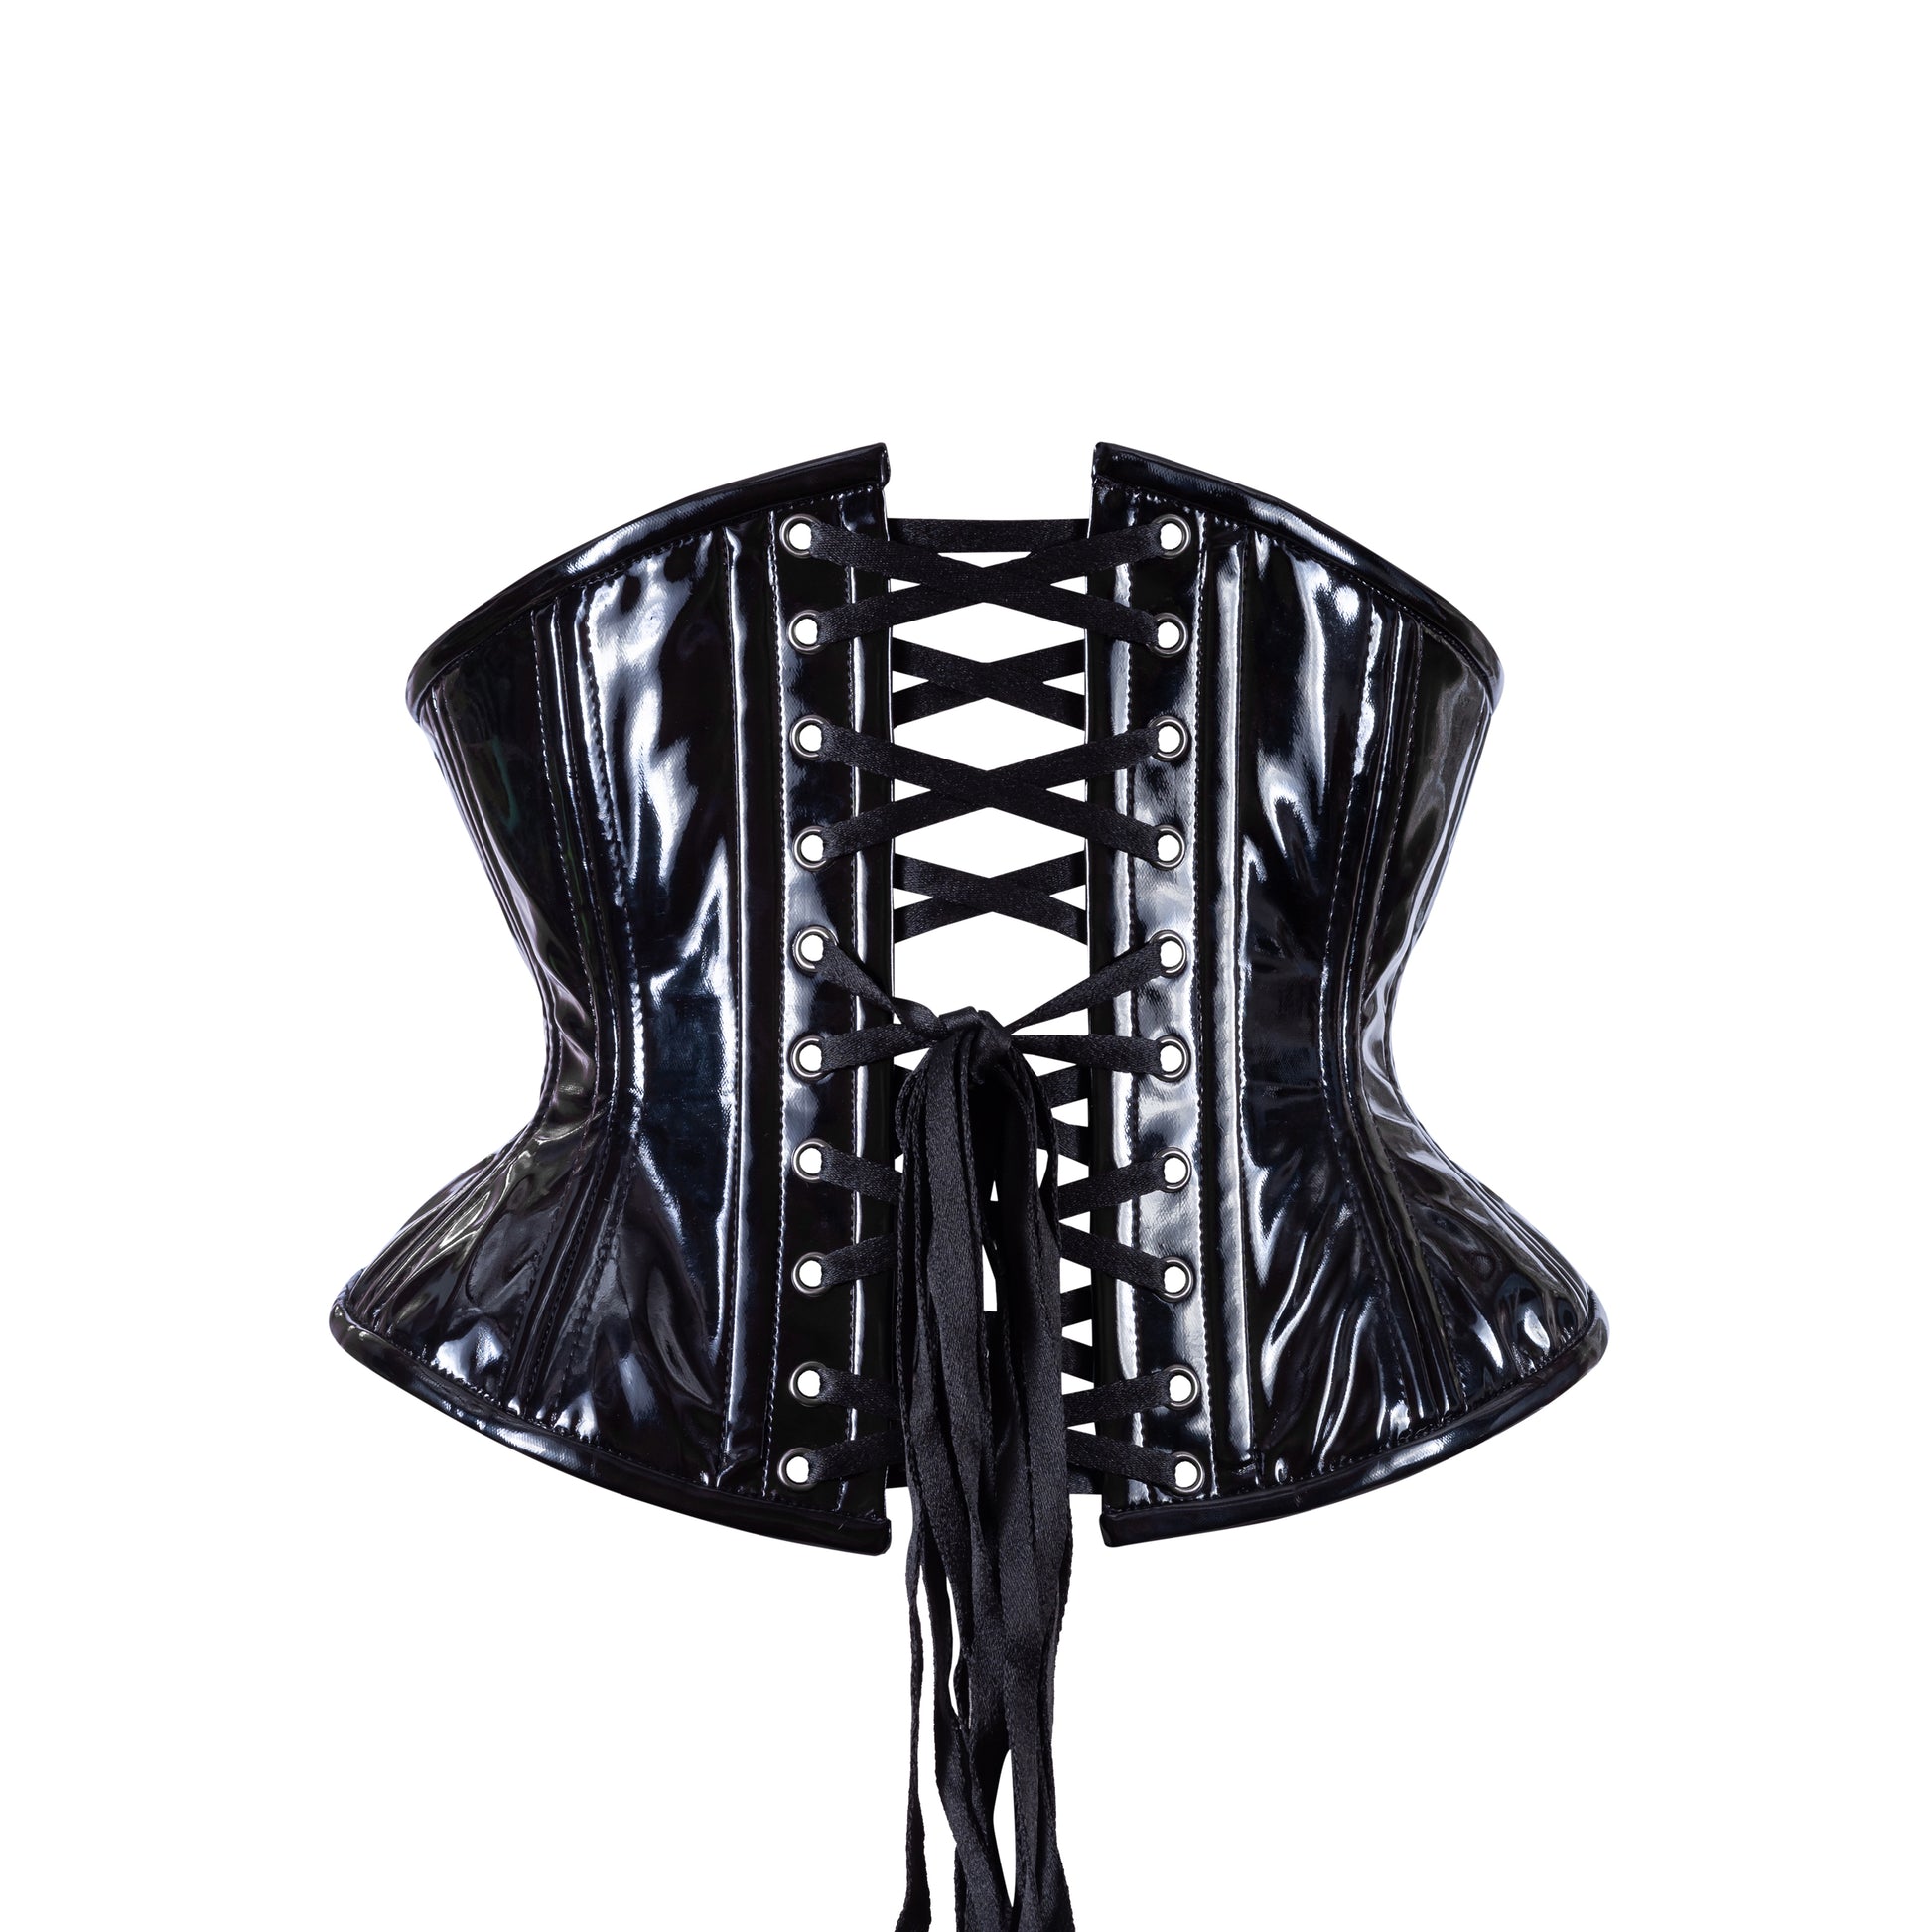 Corset Story on X: Comfortable to wear, this black latex corset